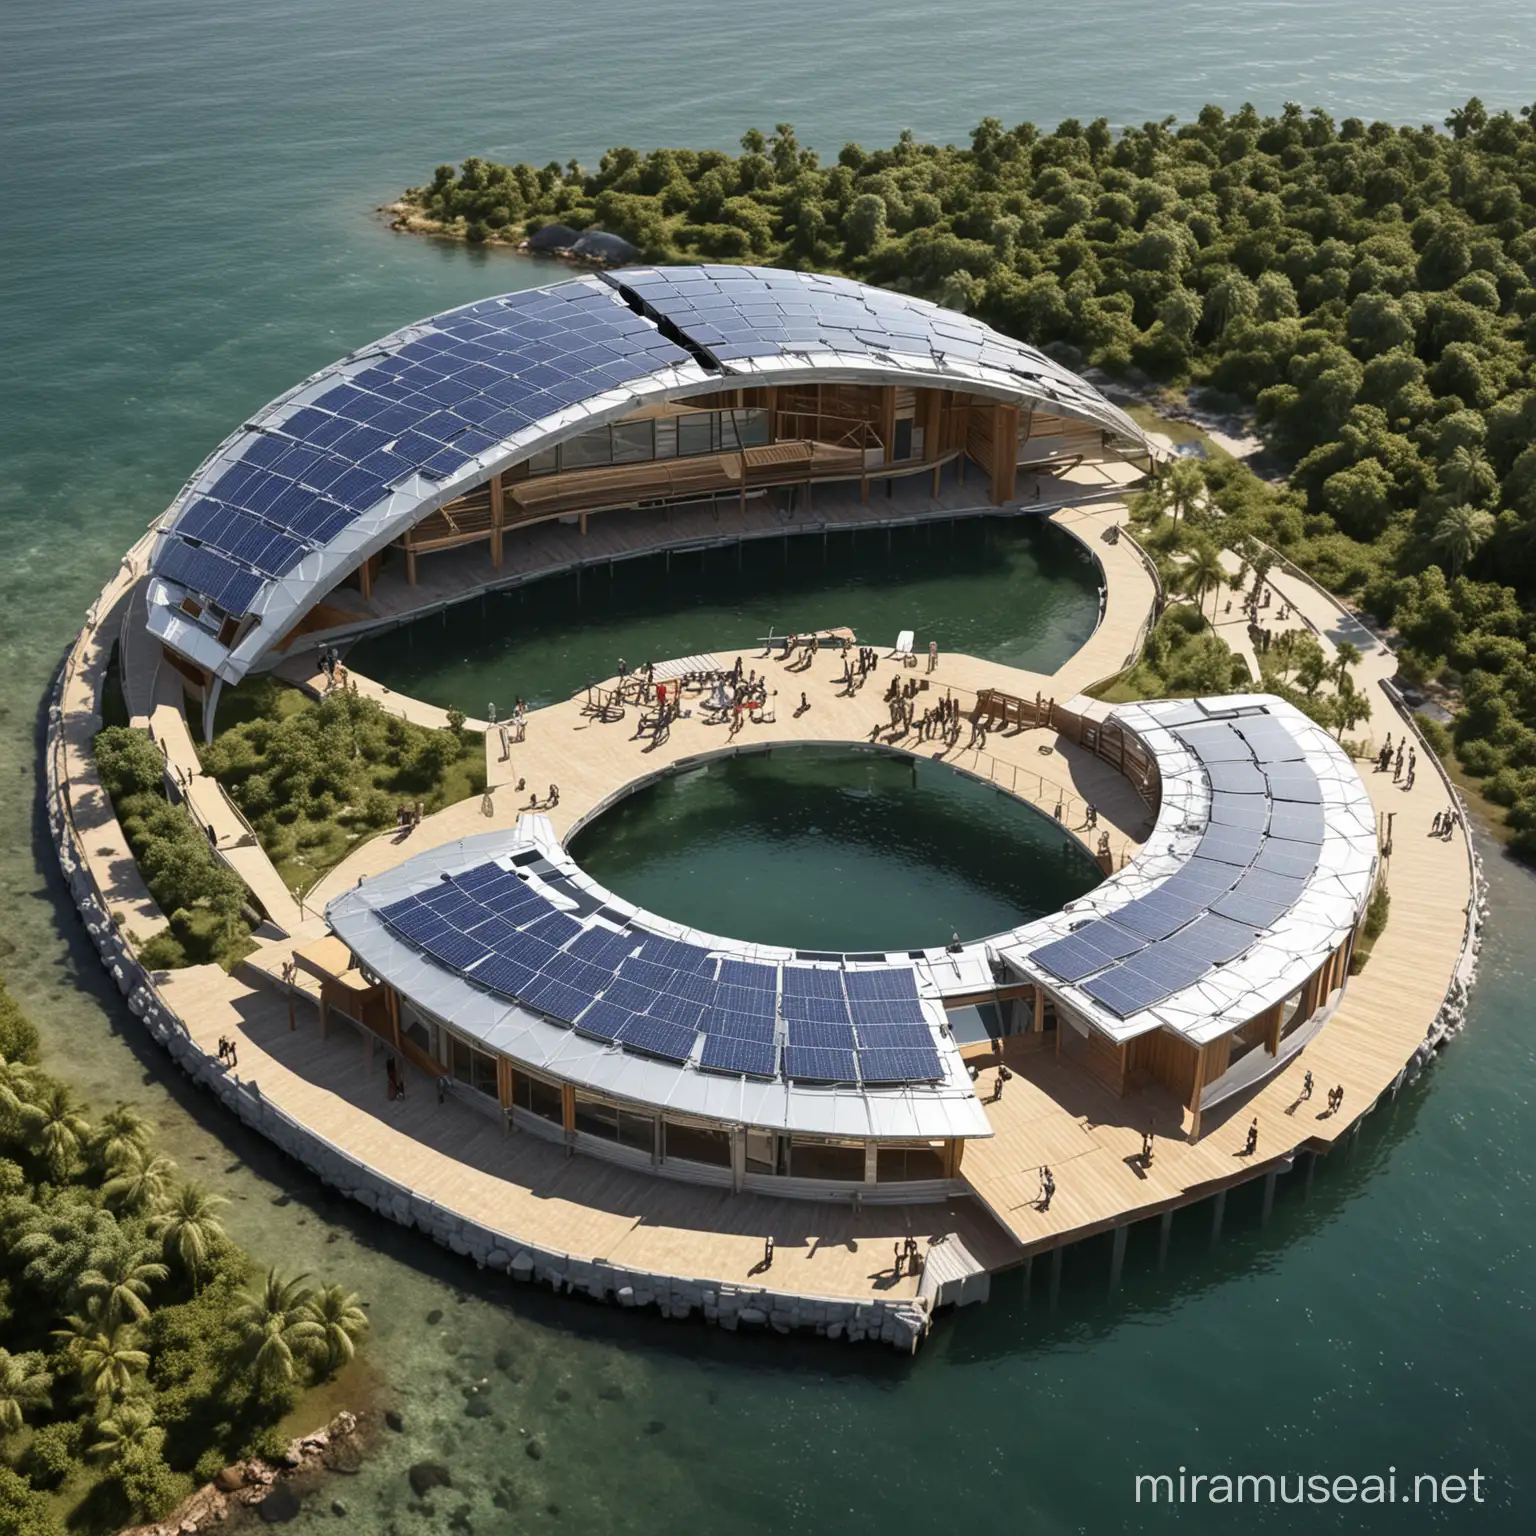 Horse shoe shape design, M.I.C.E tripple story, sustainable super structure with intergrated roof solar panels surrounded by water with a main walkway to the entrance. 
